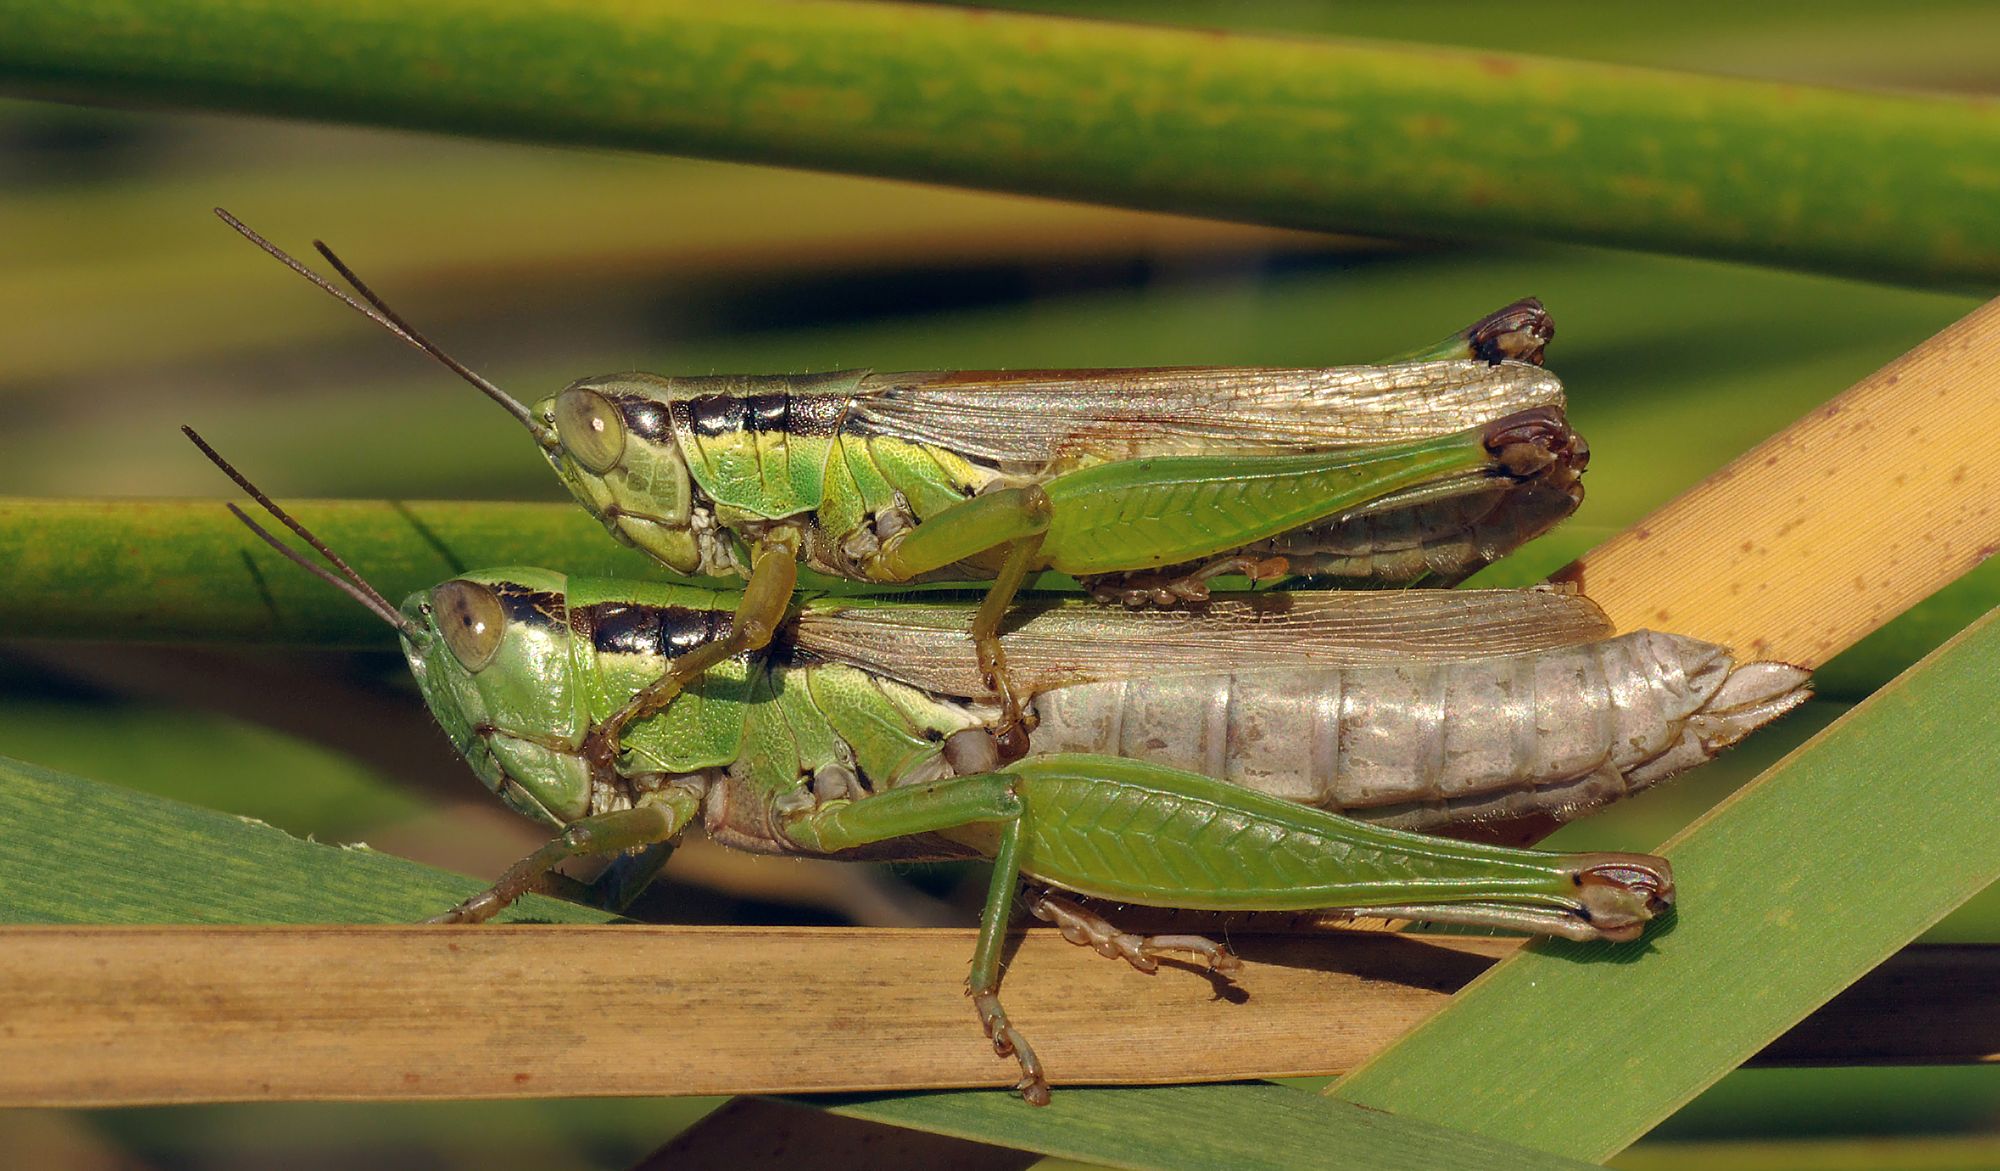 list of eatable locusts and grasshoppers | Eat locusts